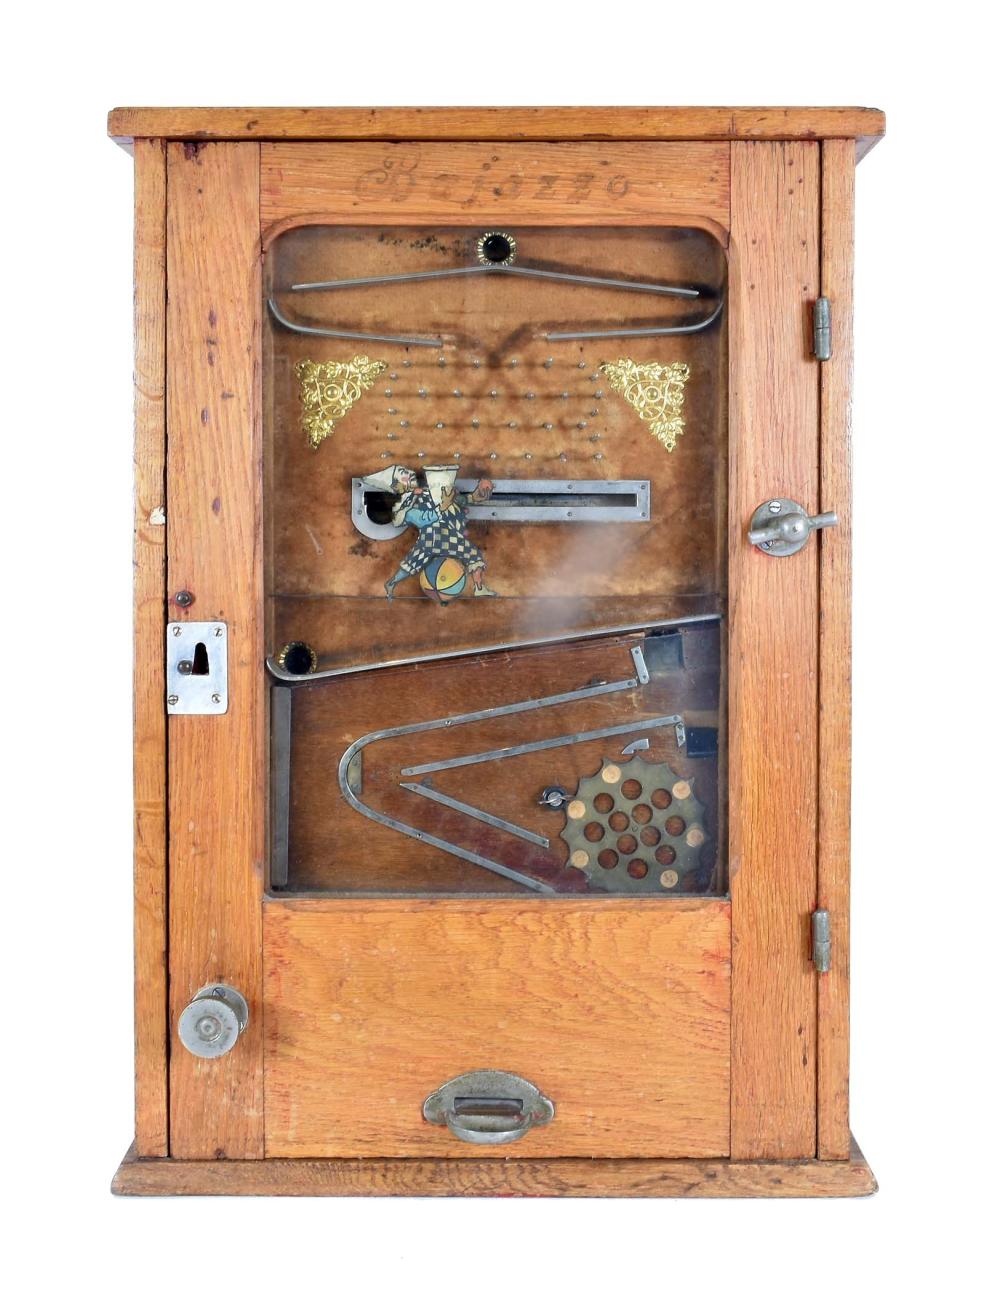 EUROPEAN COIN OPERATED MECHANICAL